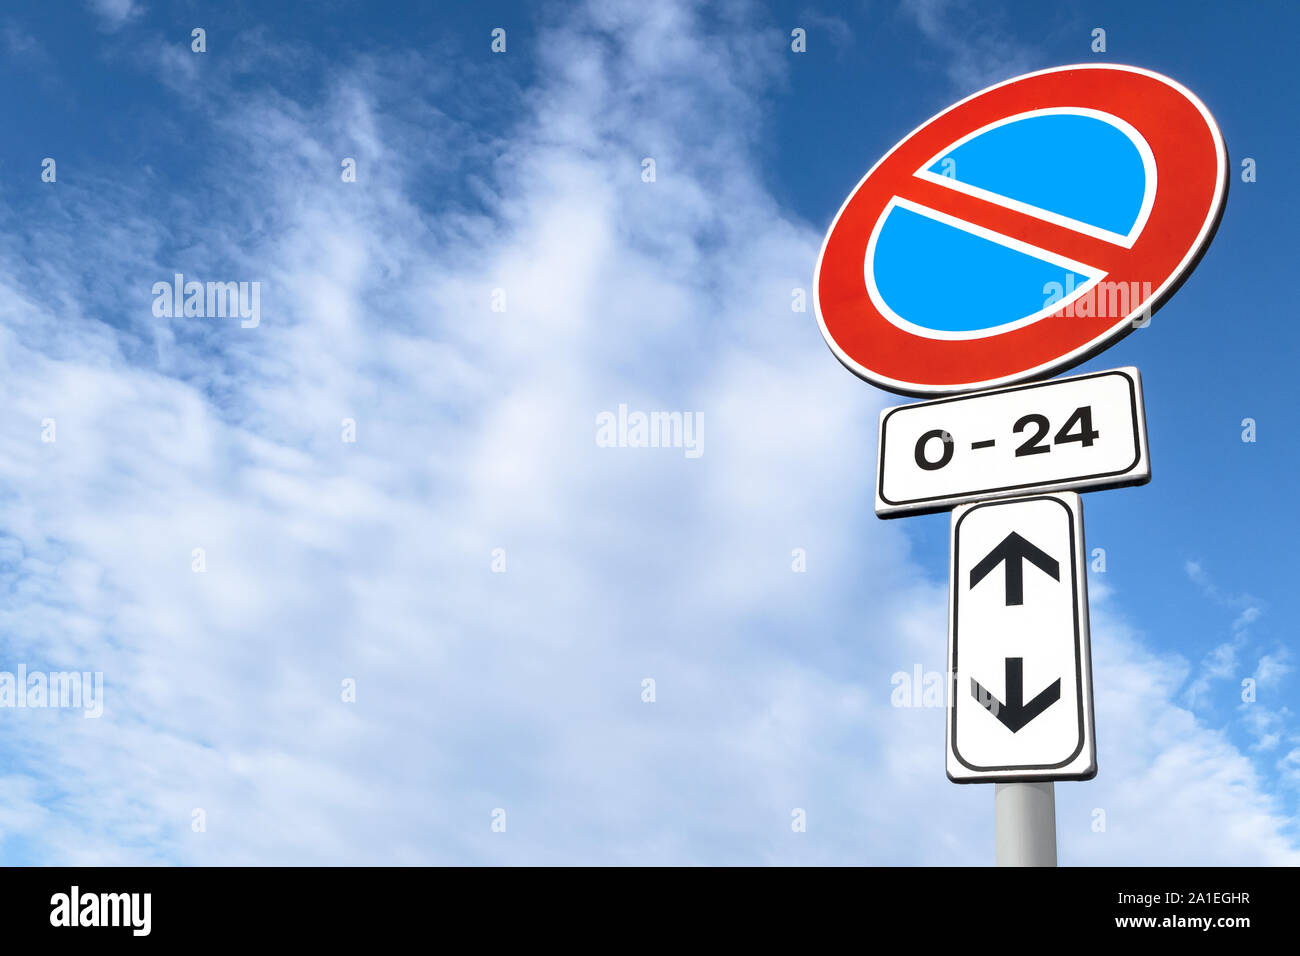 No Waiting at anytime road sign. Sky background with copy space. Stock Photo